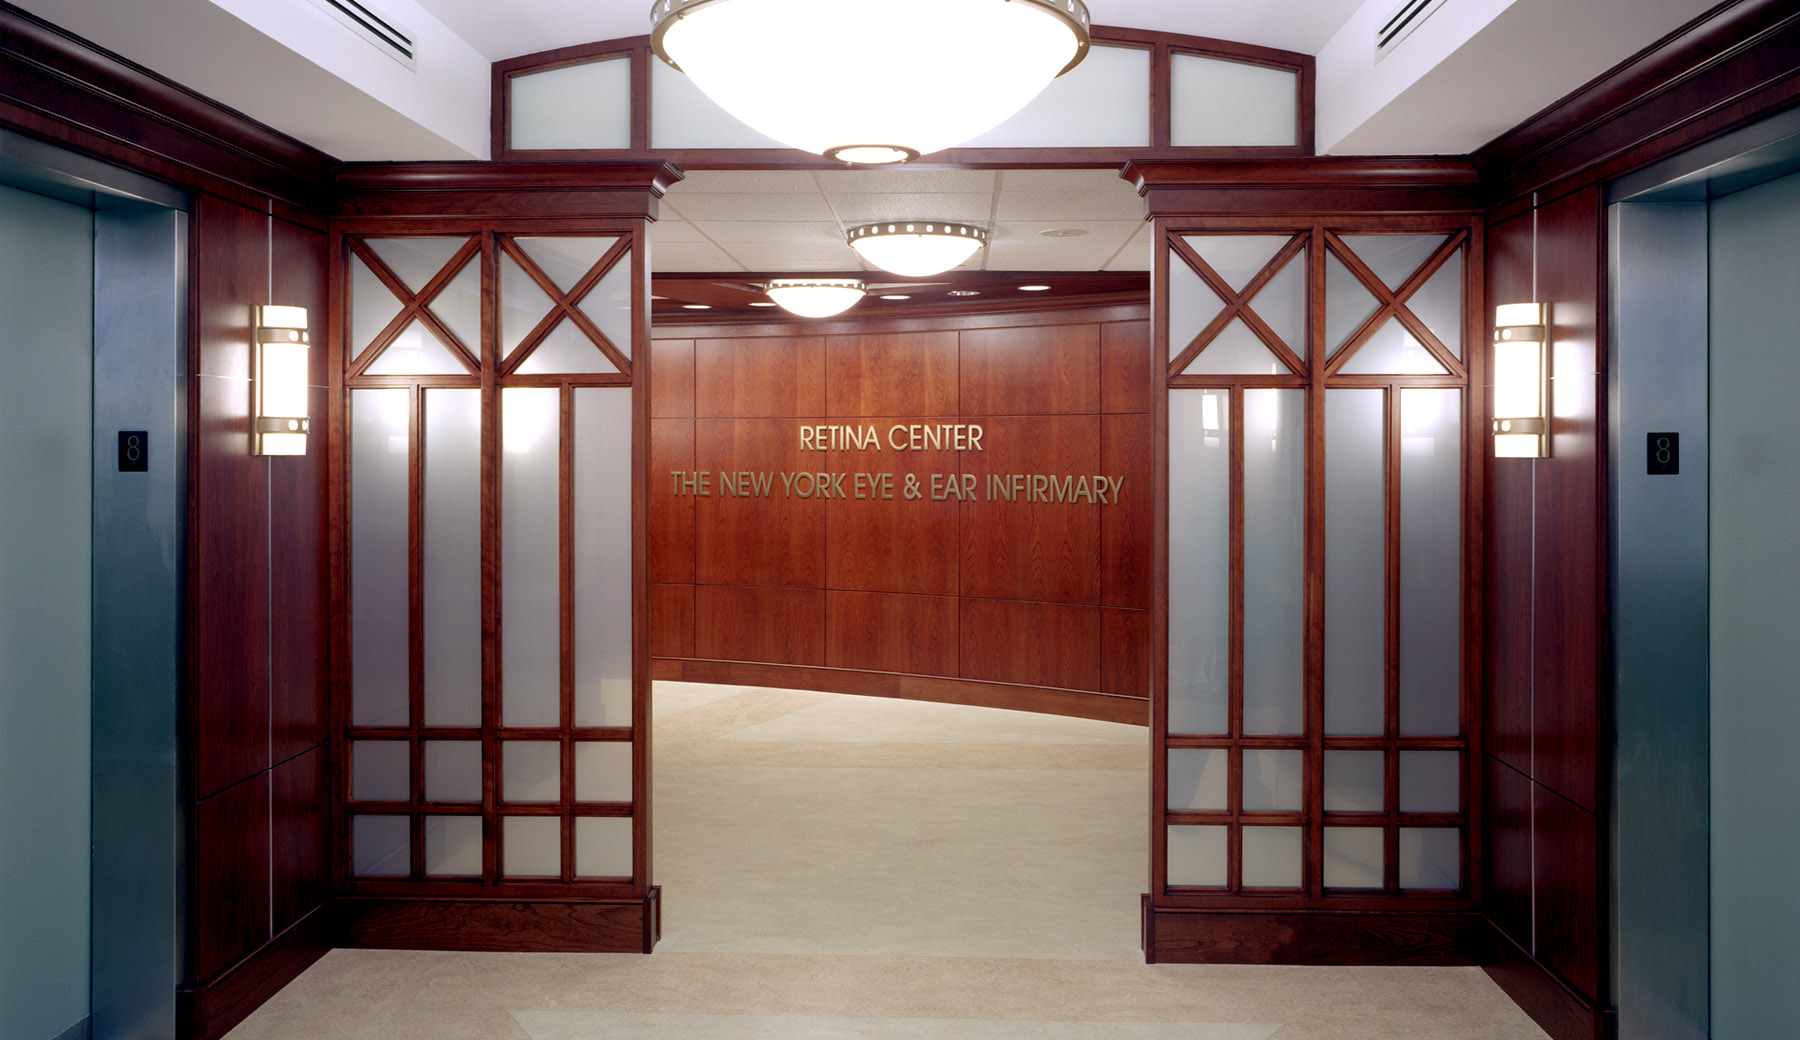 The New York Eye and Ear Infirmary is an Eye Trauma Center for New York City. Warm cherry wood with classical metal accents and elegant floor patterns provide a calming atmosphere.